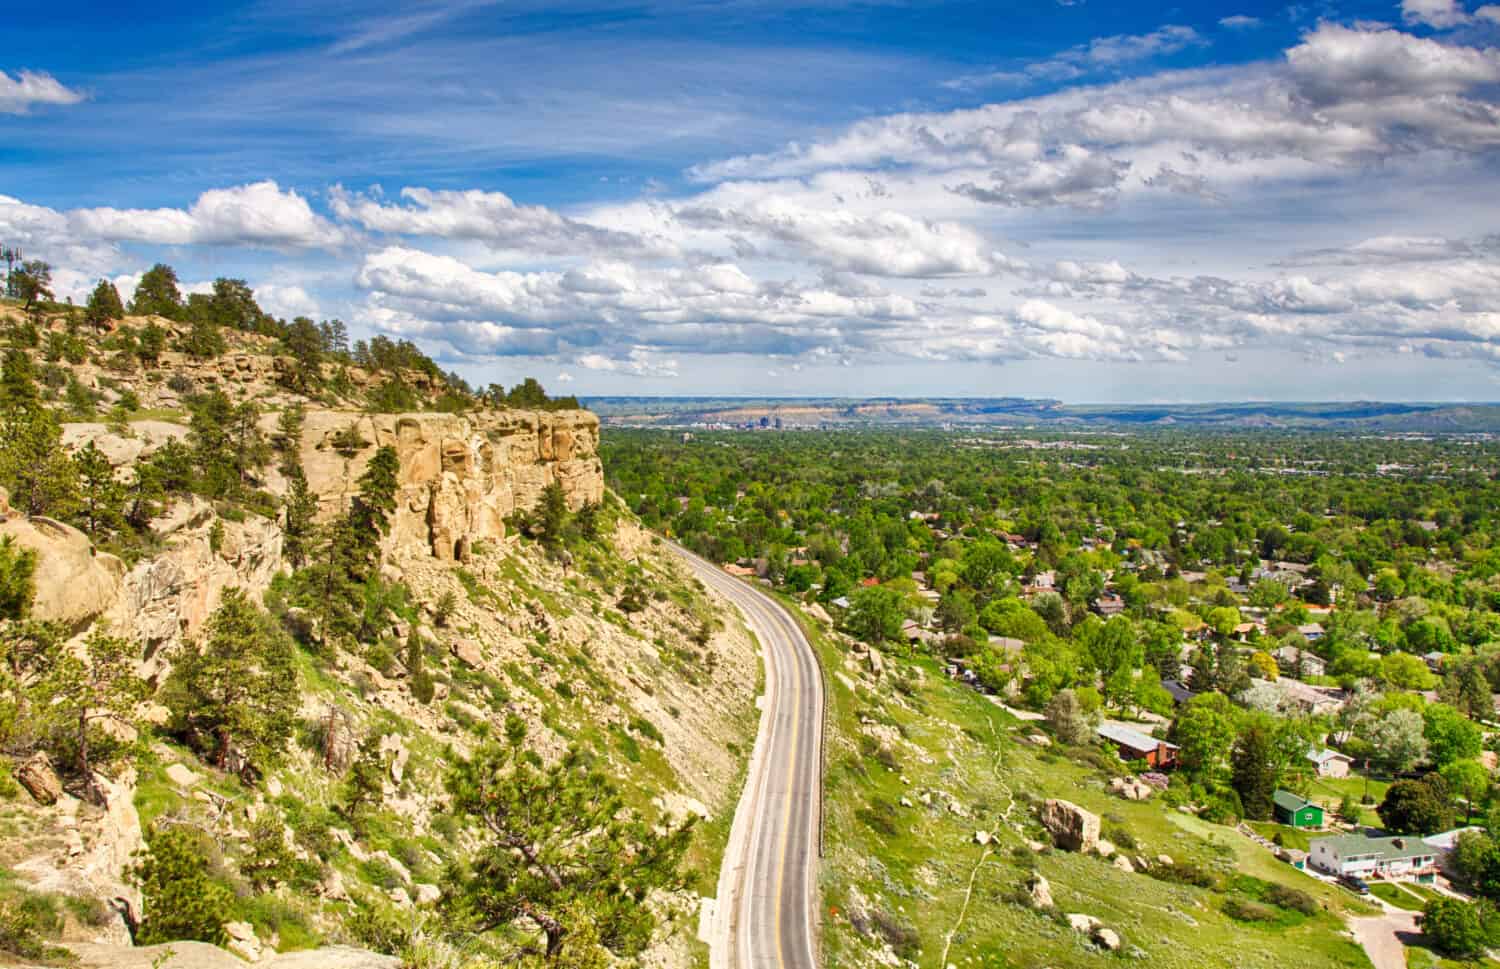 Zimmerman trail as it winds up the rim rocks on the West end of Billings, Montana.